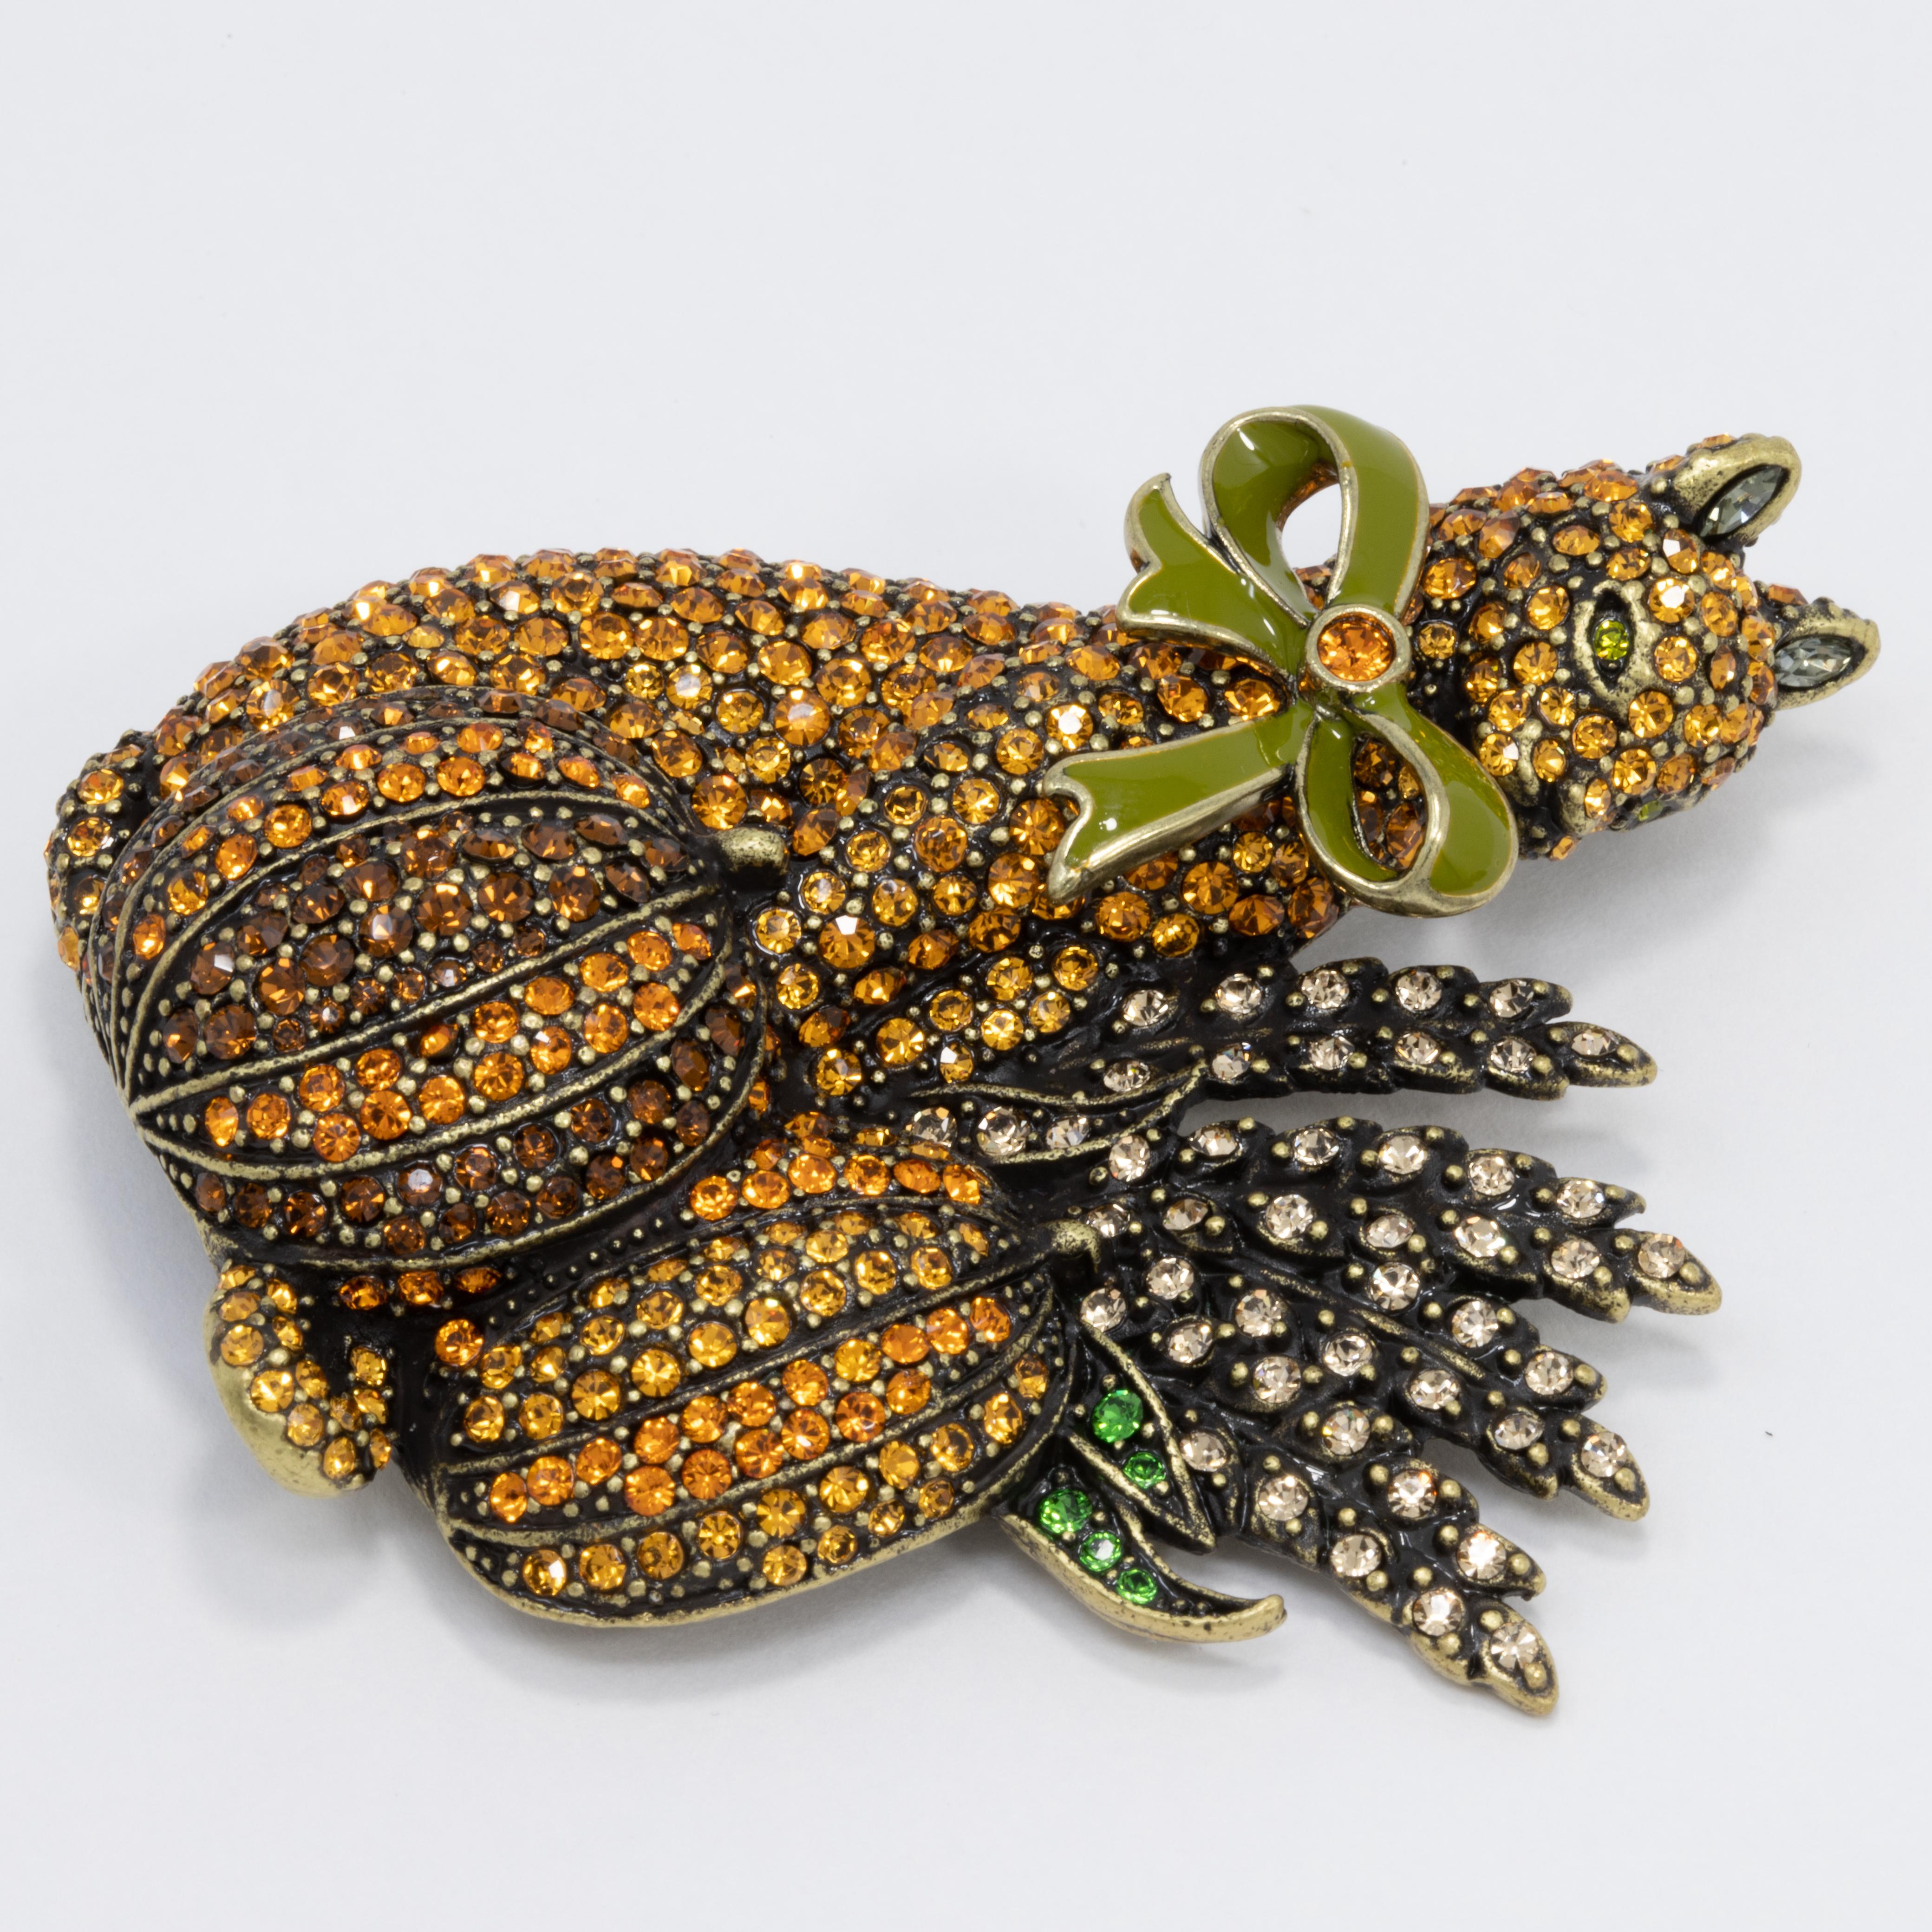 An adorable cat set between two shining pumpkins and glamorous wheat stalks. Decorated with pave glimmering crystals, this piece is finished off with a lovely enamel bow collar. Add a bit of feline fancy to your ensemble today!

By Heidi